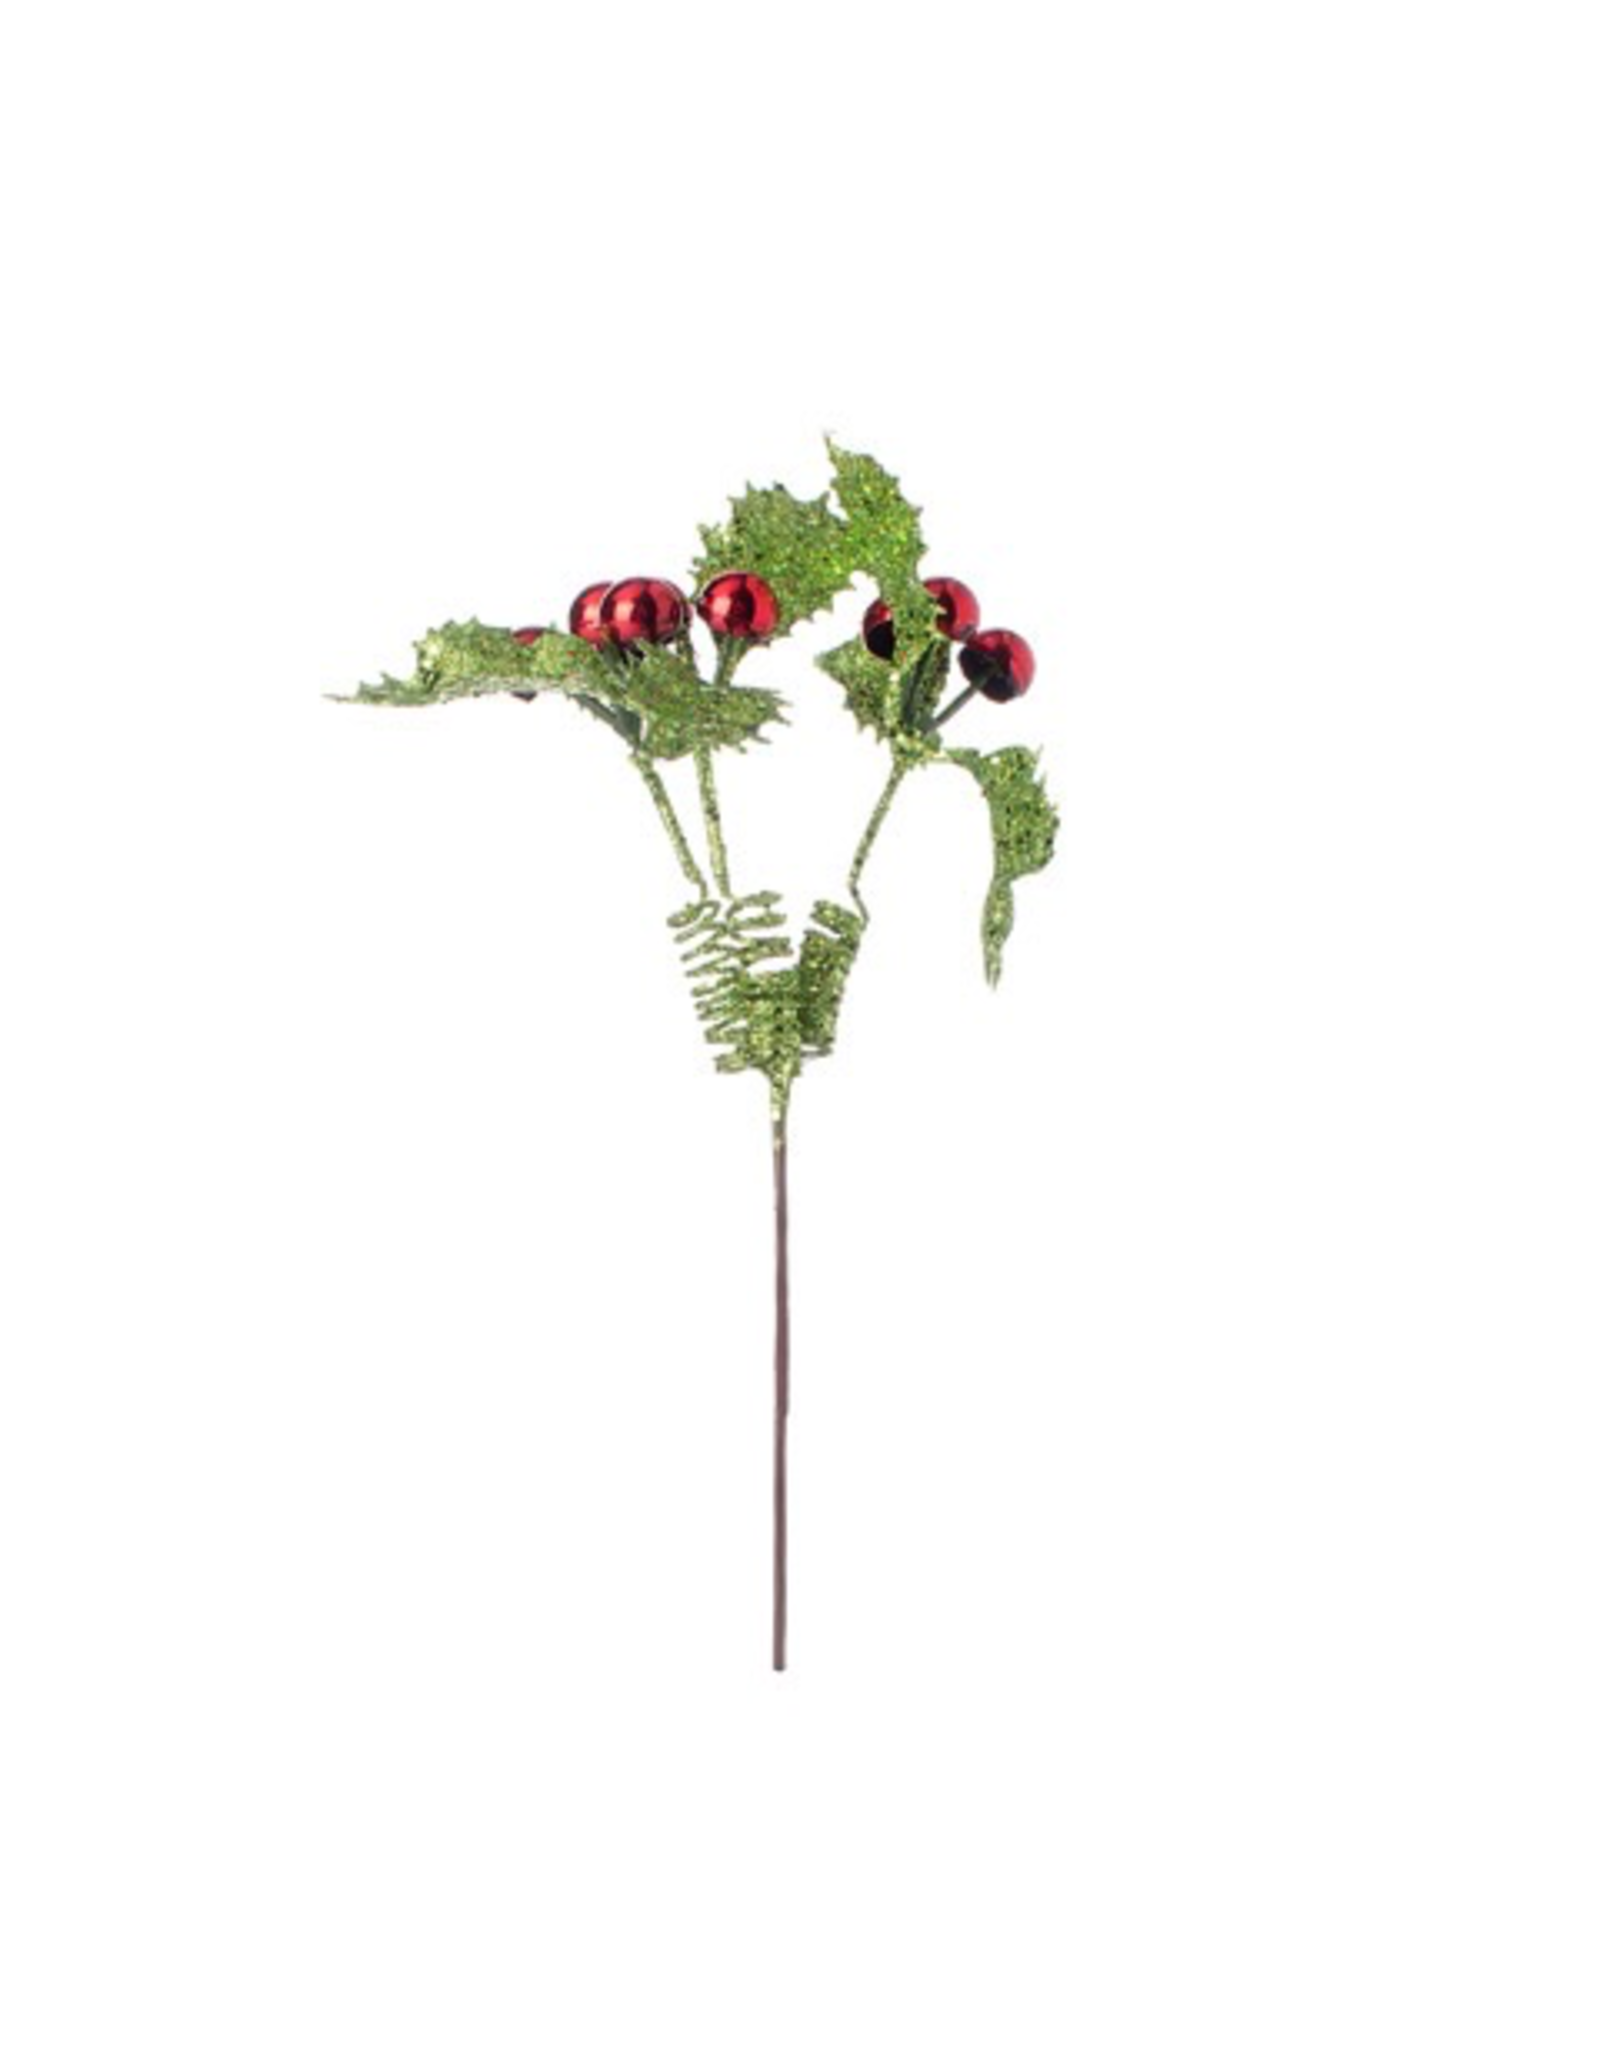 Darice Christmas Holly Berry Pick Greenery w Red Berries 10.5 inch